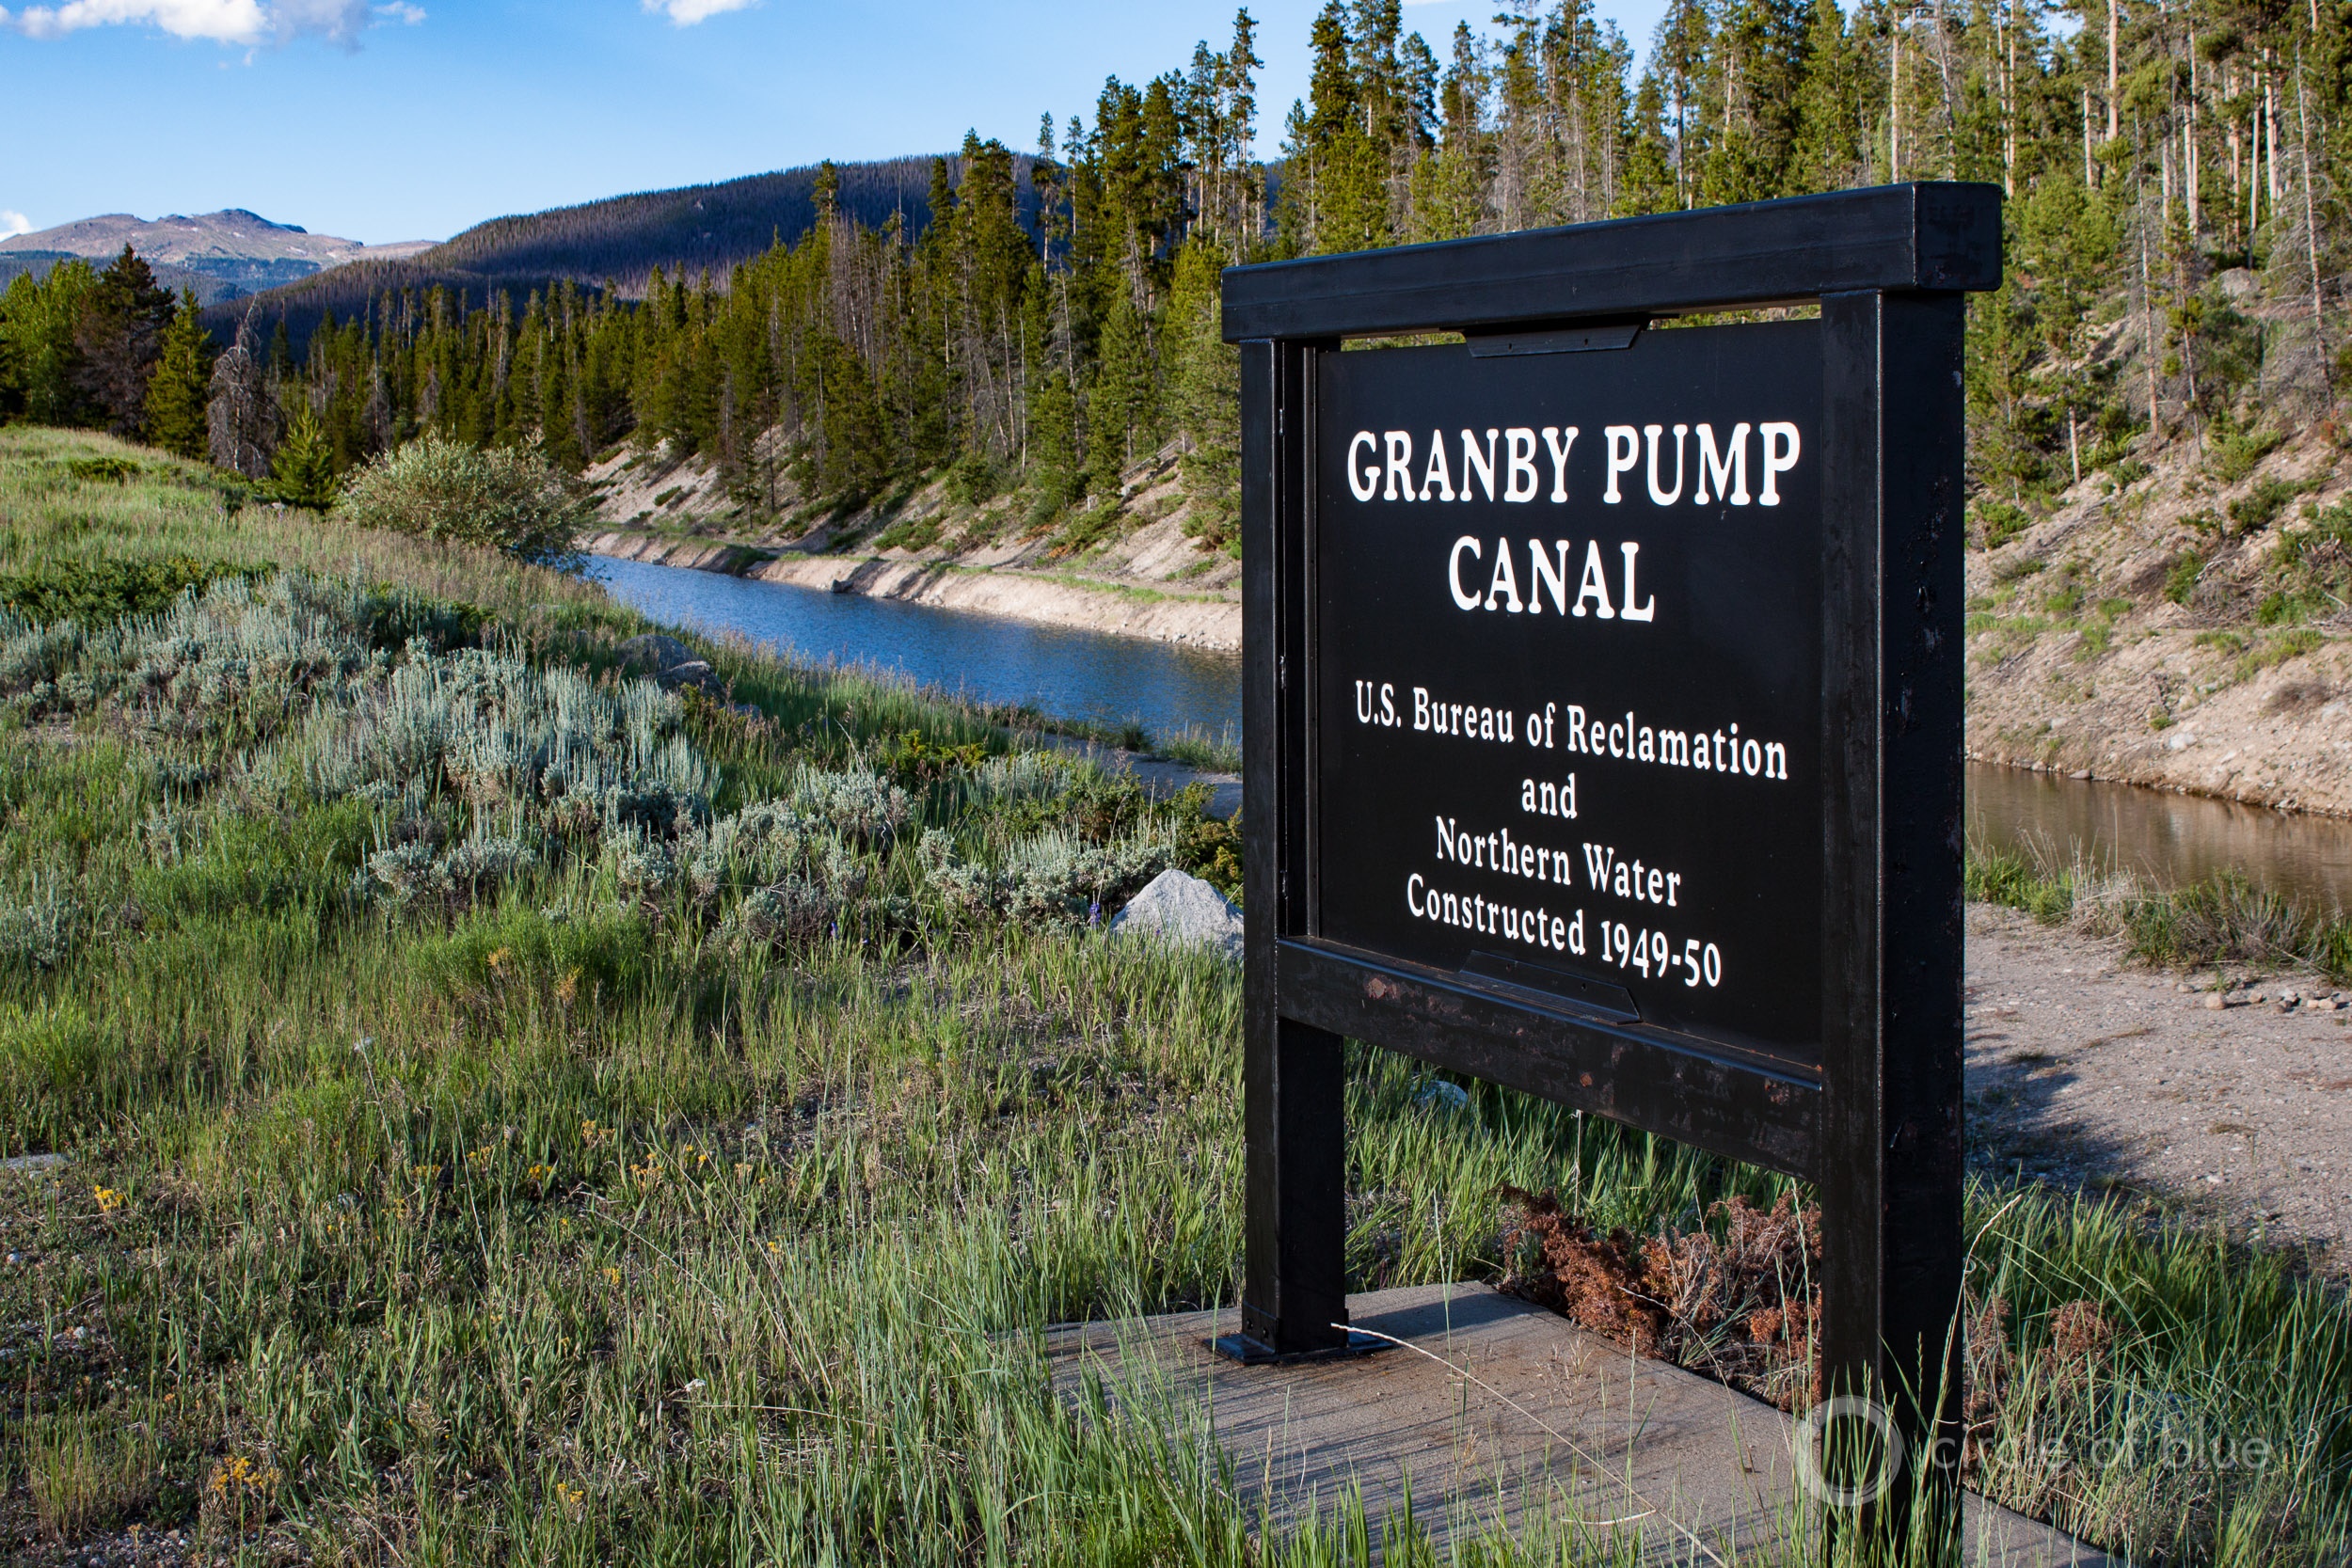 The Bureau of Reclamation owns more than 8,100 miles of canals, including the Granby Pump Canal, in Colorado. Photo © Brett Walton / Circle of Blue